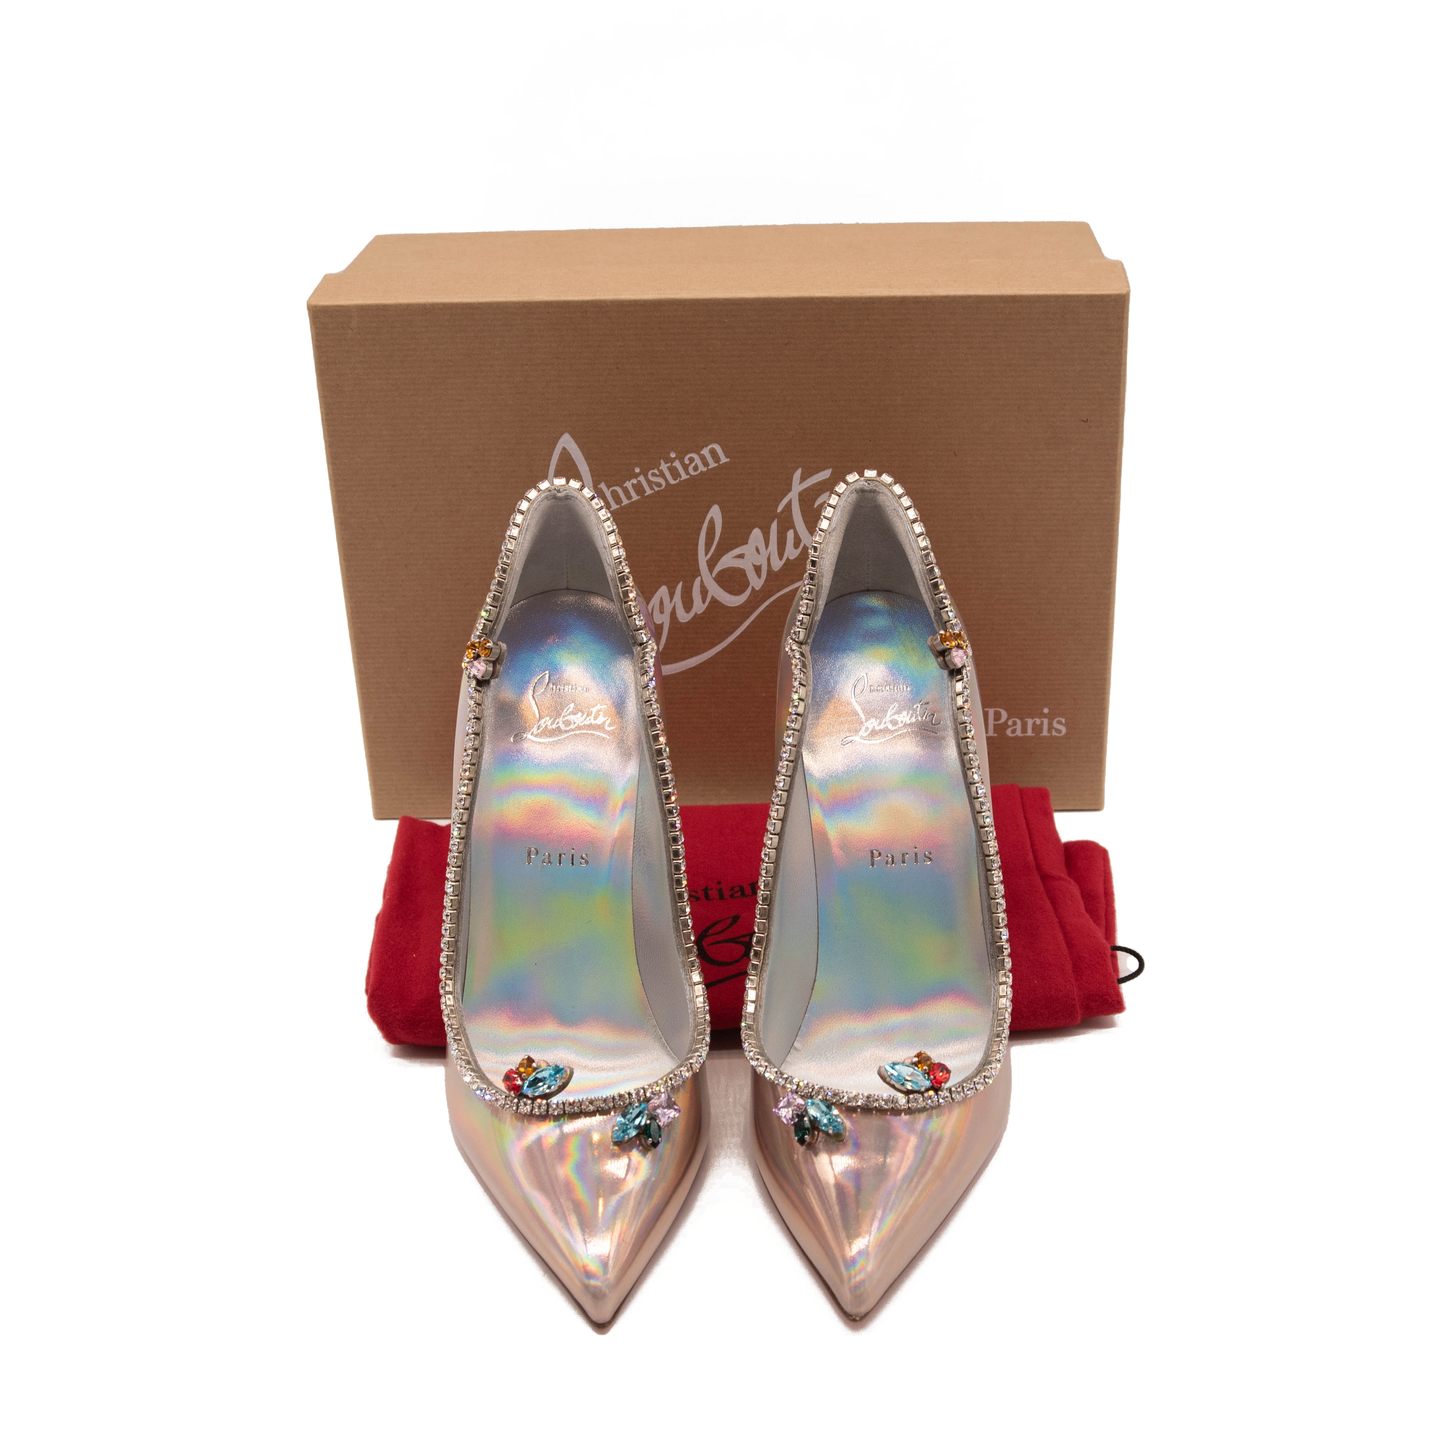 NEW Christian Louboutin Chick Queen Pointed Toe Pump Wood Rose 37.5 EU